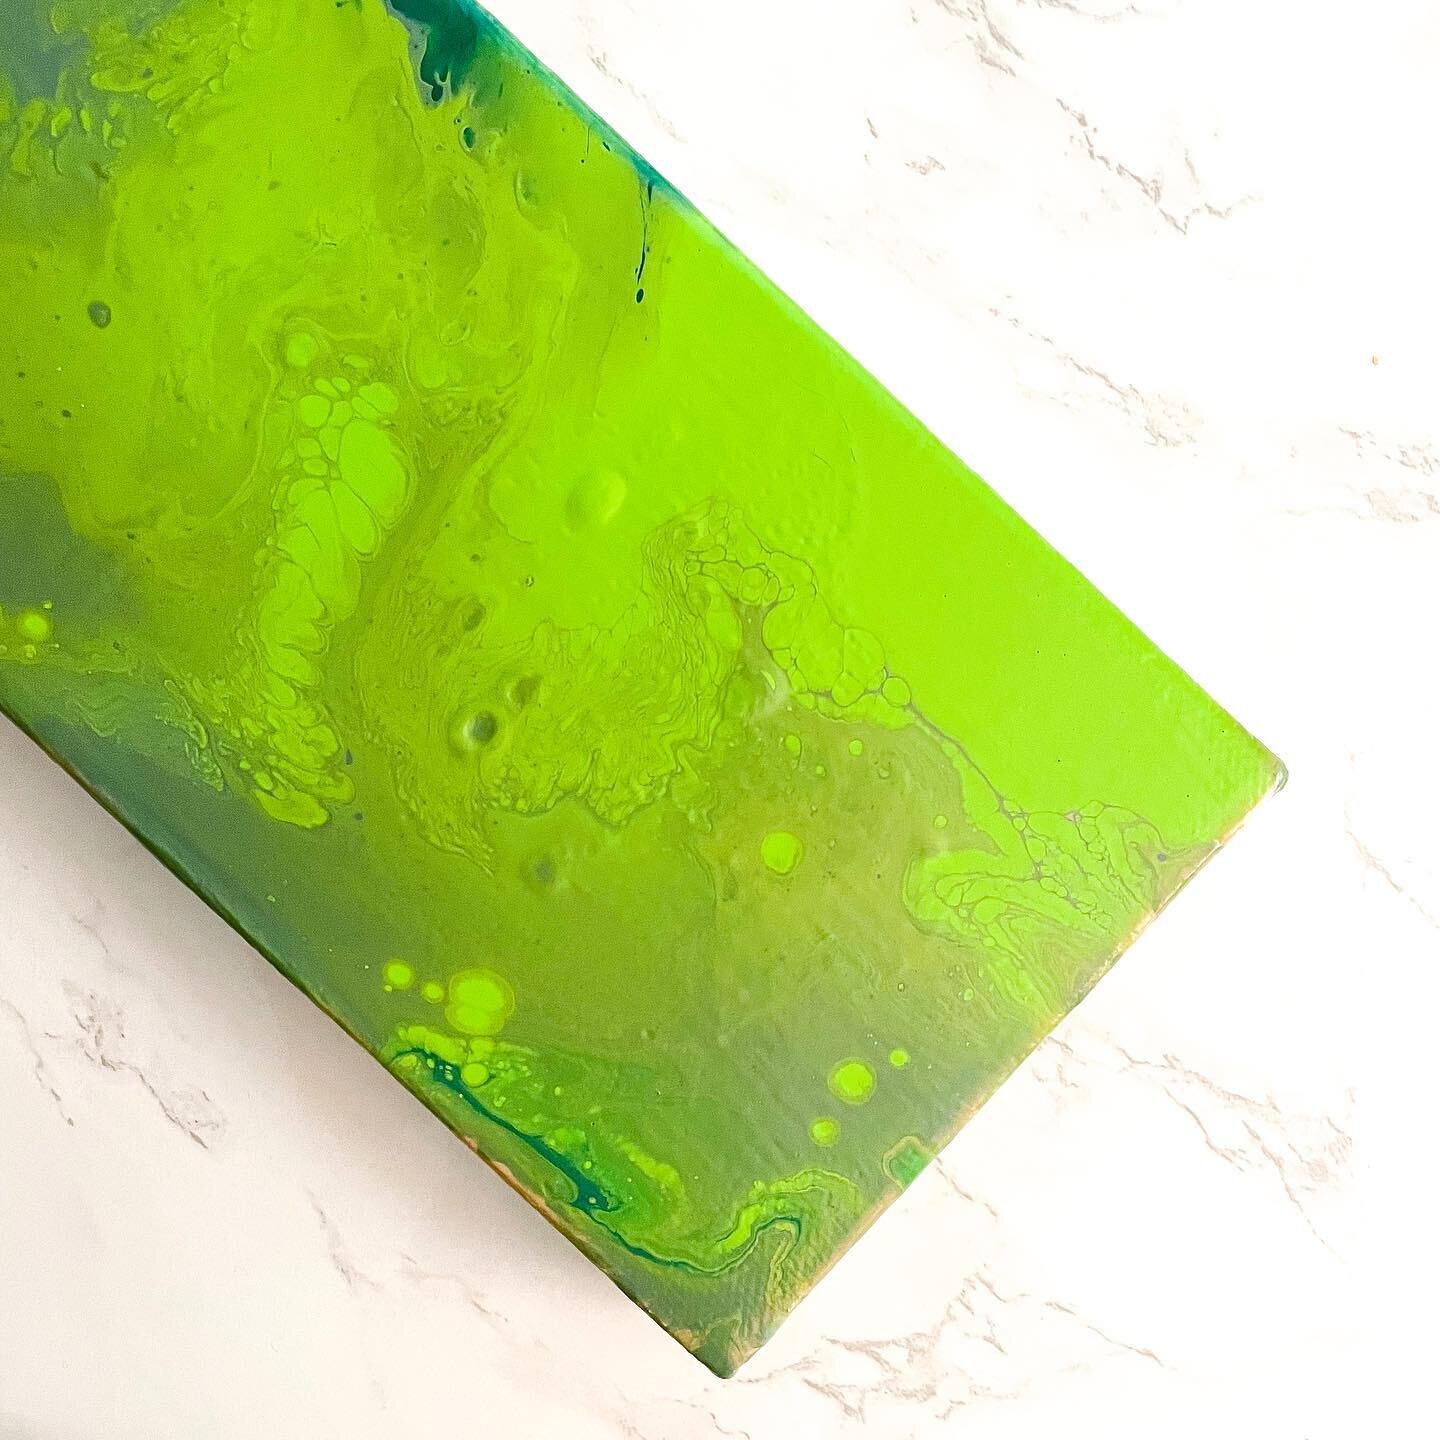 Getting a little out of my color comfort zone with this one! I poured this piece with the leftovers of a big, custom pour

I&rsquo;m so curious- what do these colors and textures make you think of?